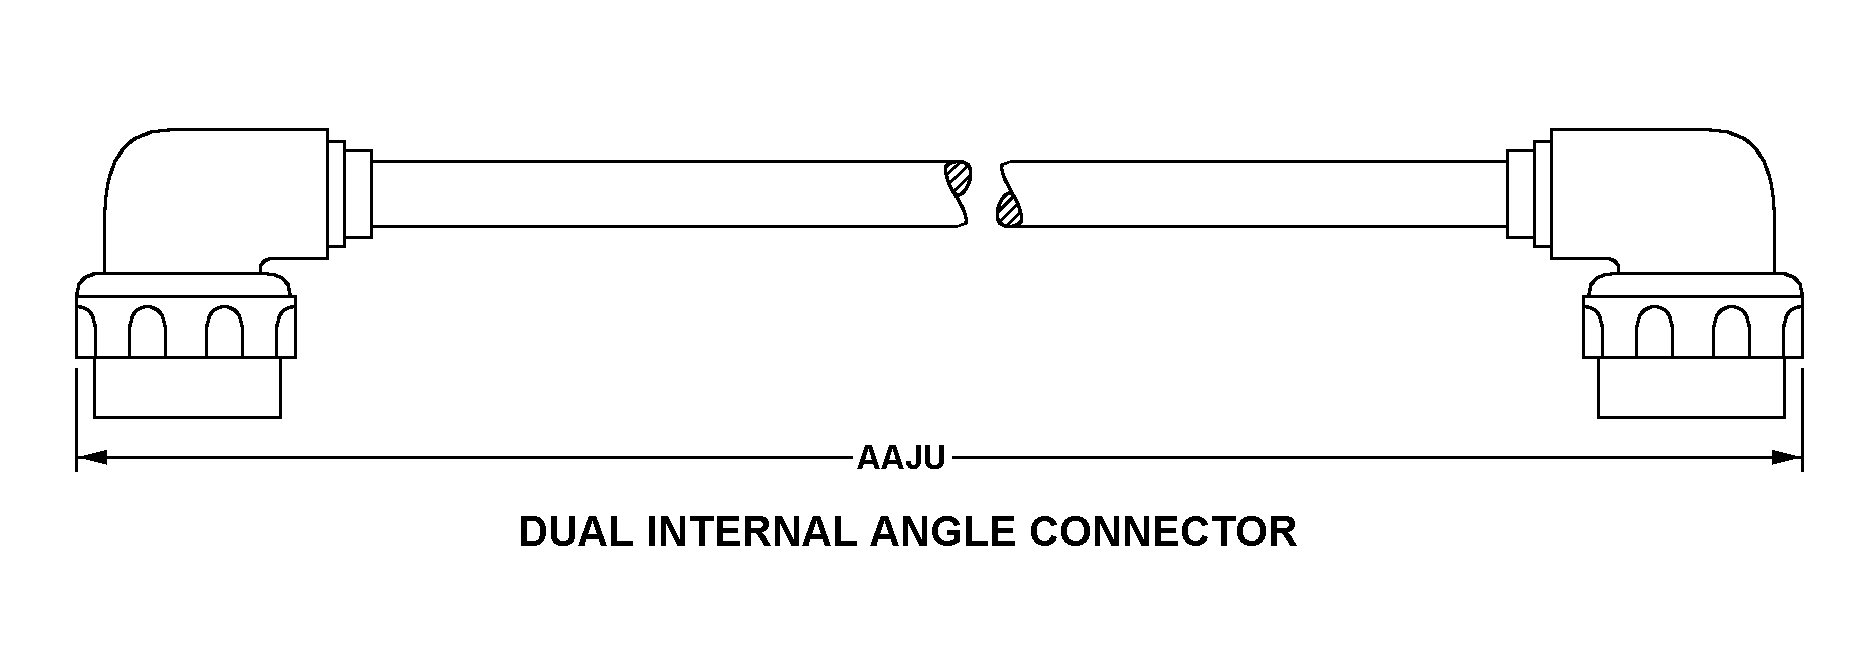 DUAL INTERNAL ANGLE CONNECTOR style nsn 5995-01-408-1773